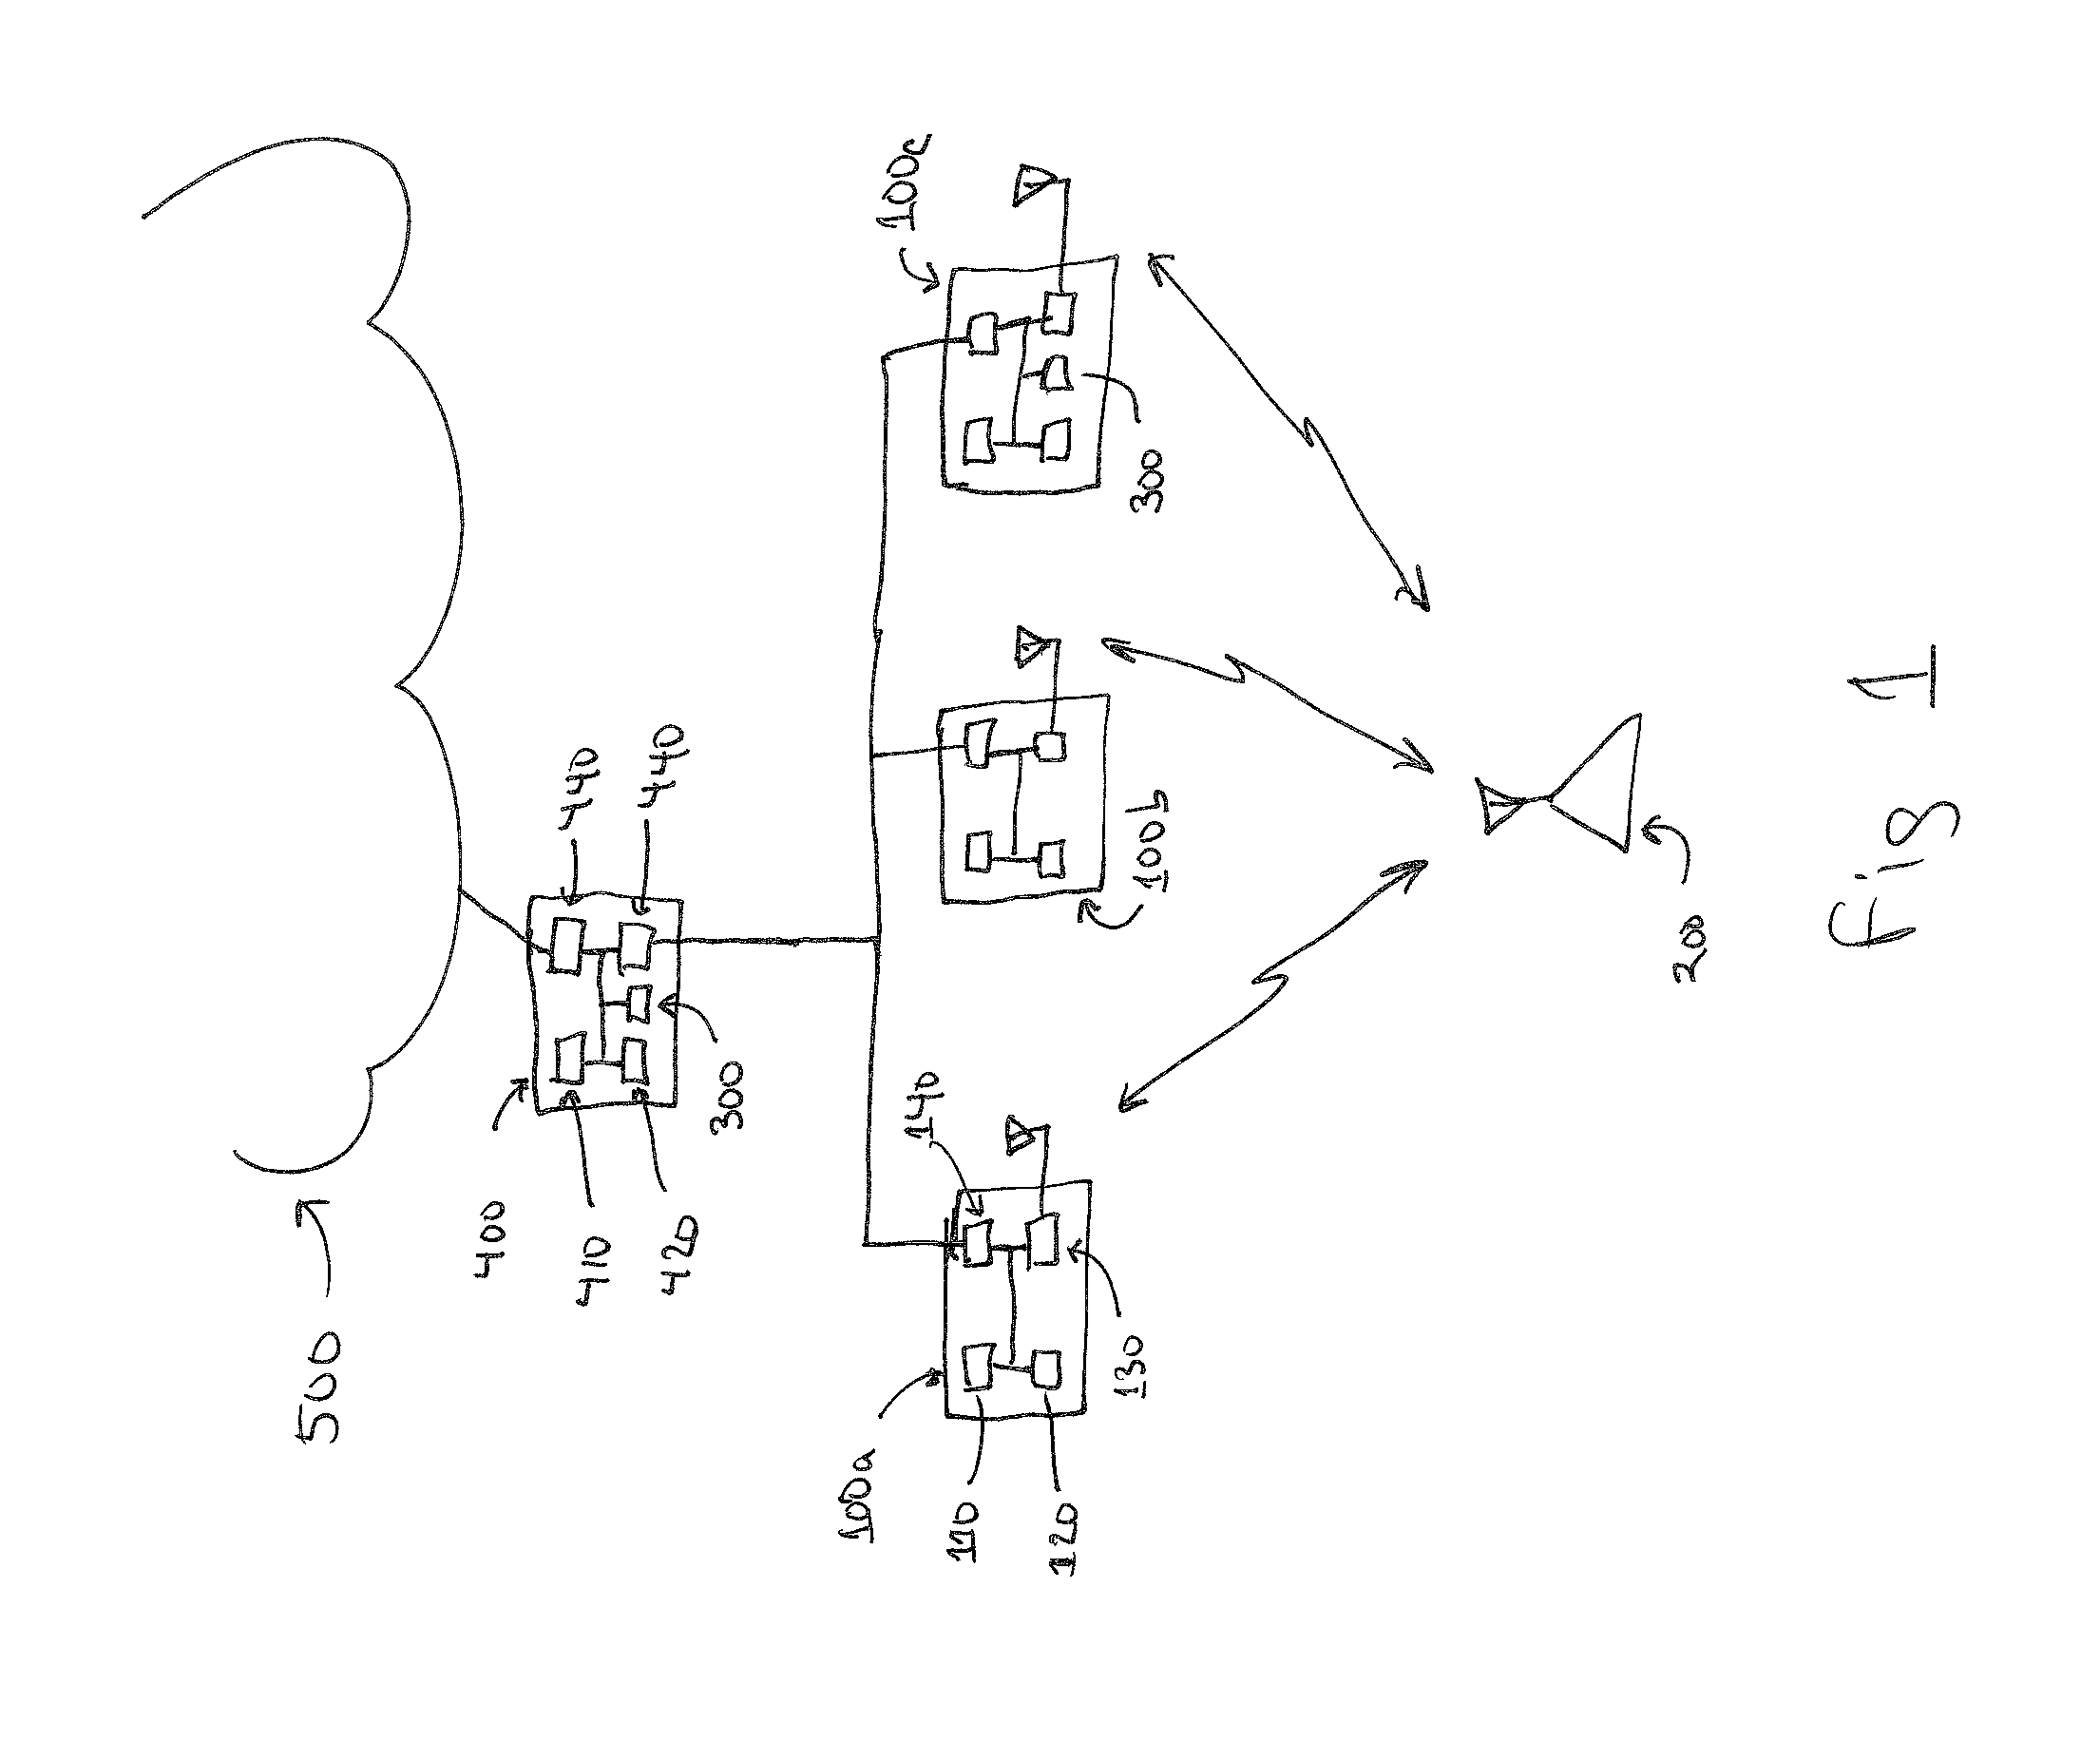 Locating Devices in a Wireless Network